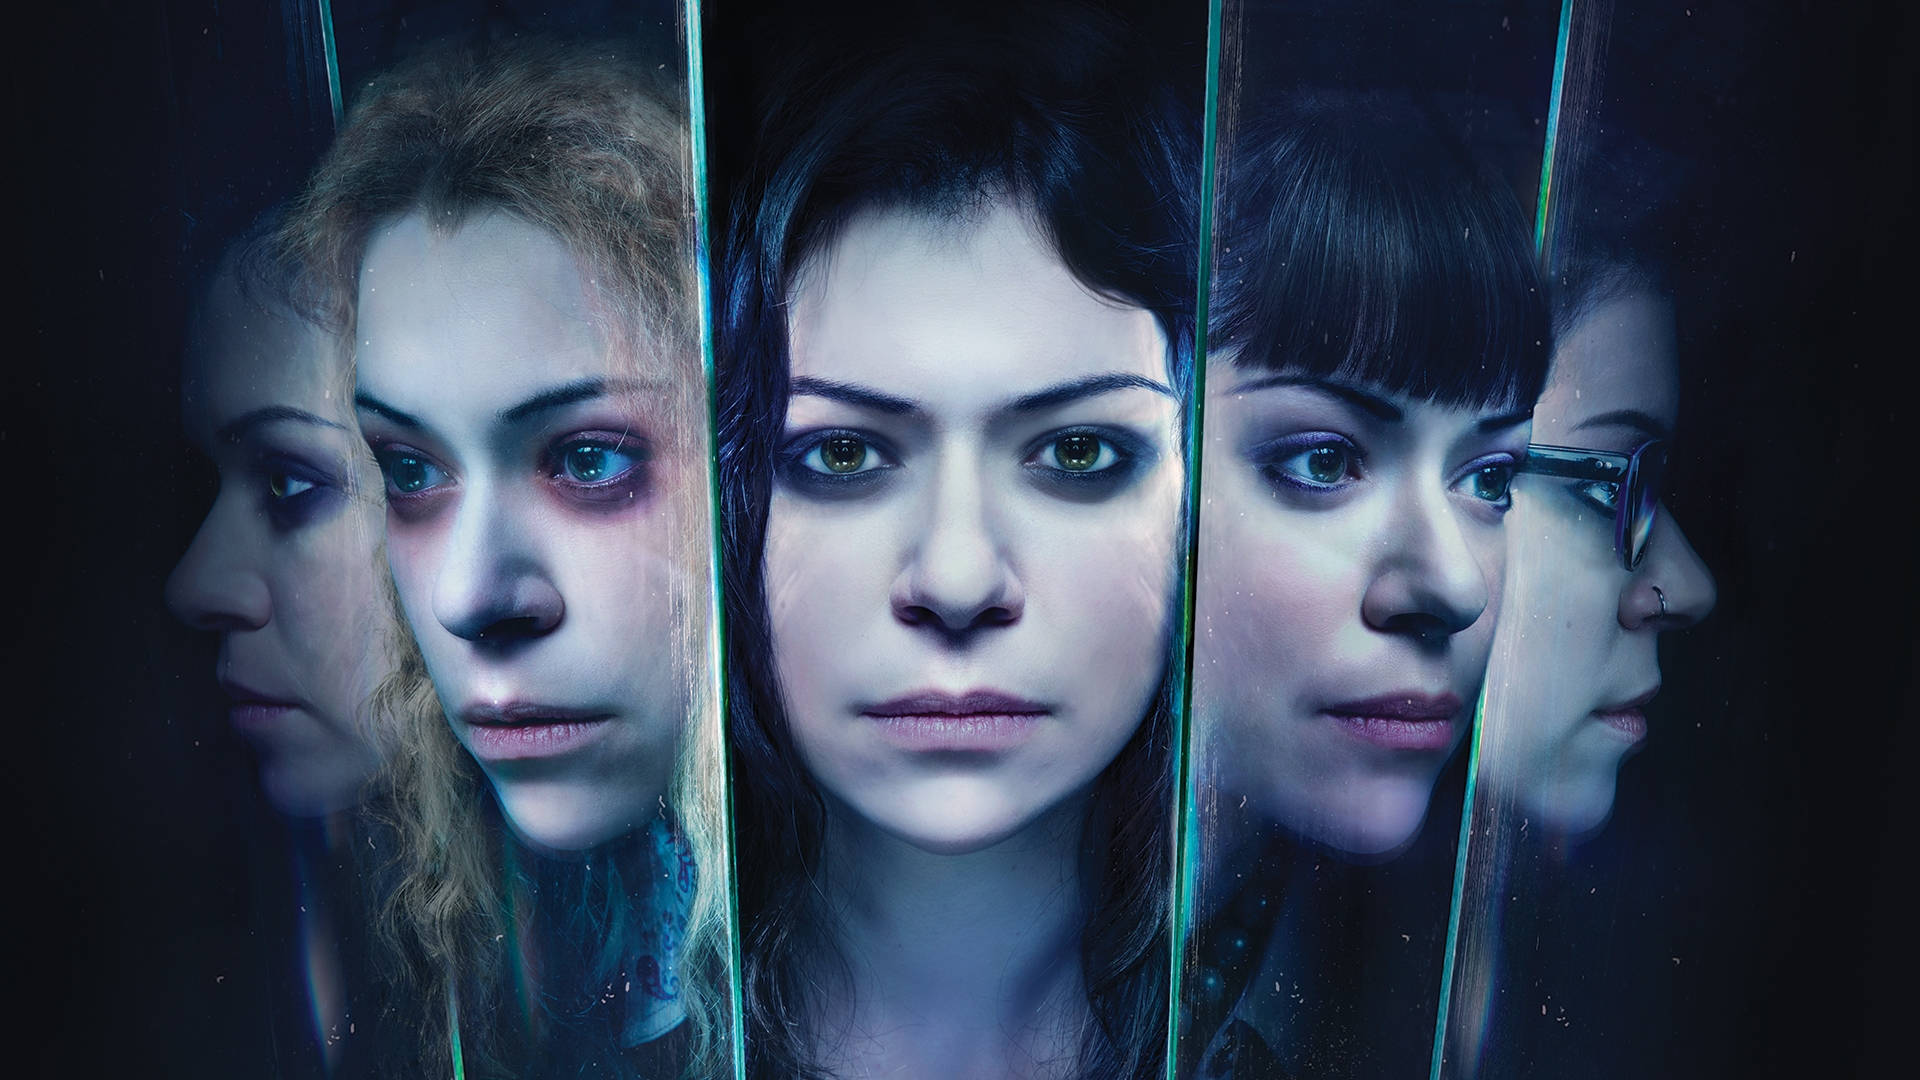 Orphan Black Fictional Clones Of Sarah Manning Picture